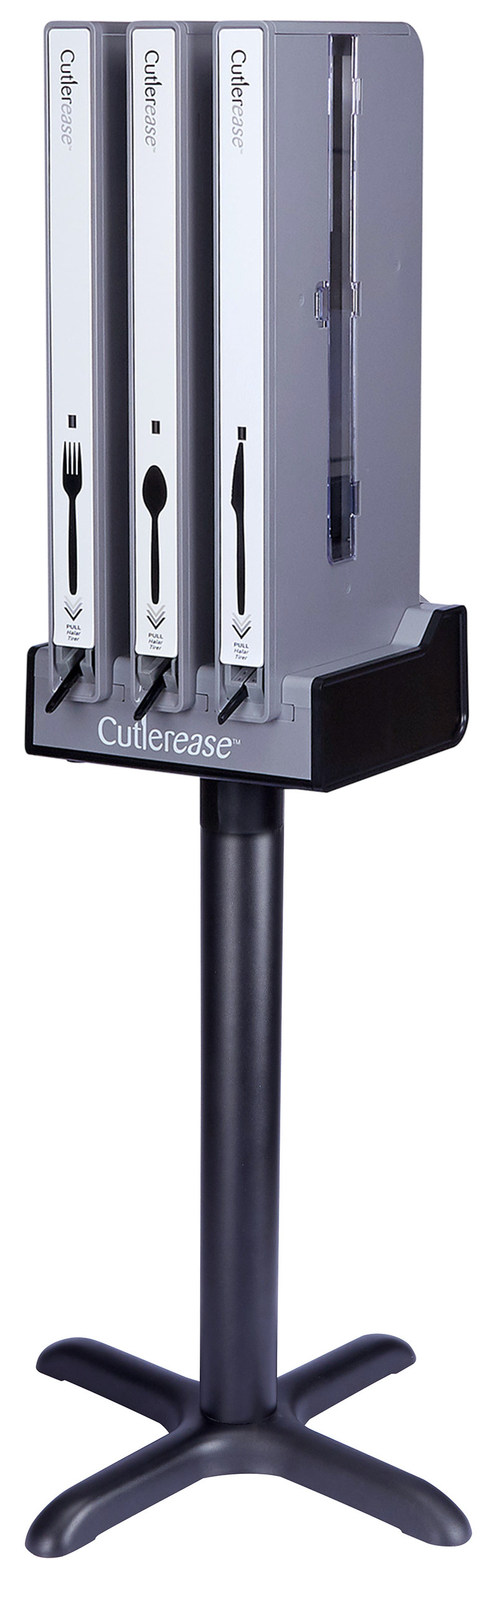 Waddington North America (WNA), a Novolex brand, is introducing a new stand for Cutlerease, a patented dispenser that offers customers one disposable utensil at a time. The new stand allows Cutlerease to be set up anywhere, saving even more space for foodservice operations. The stand is available for the triple-tower base to hold forks, knives and spoons or any combination of the three types of utensils. To learn more about Cutlerease, visit www.wna.biz/cutlerease/.